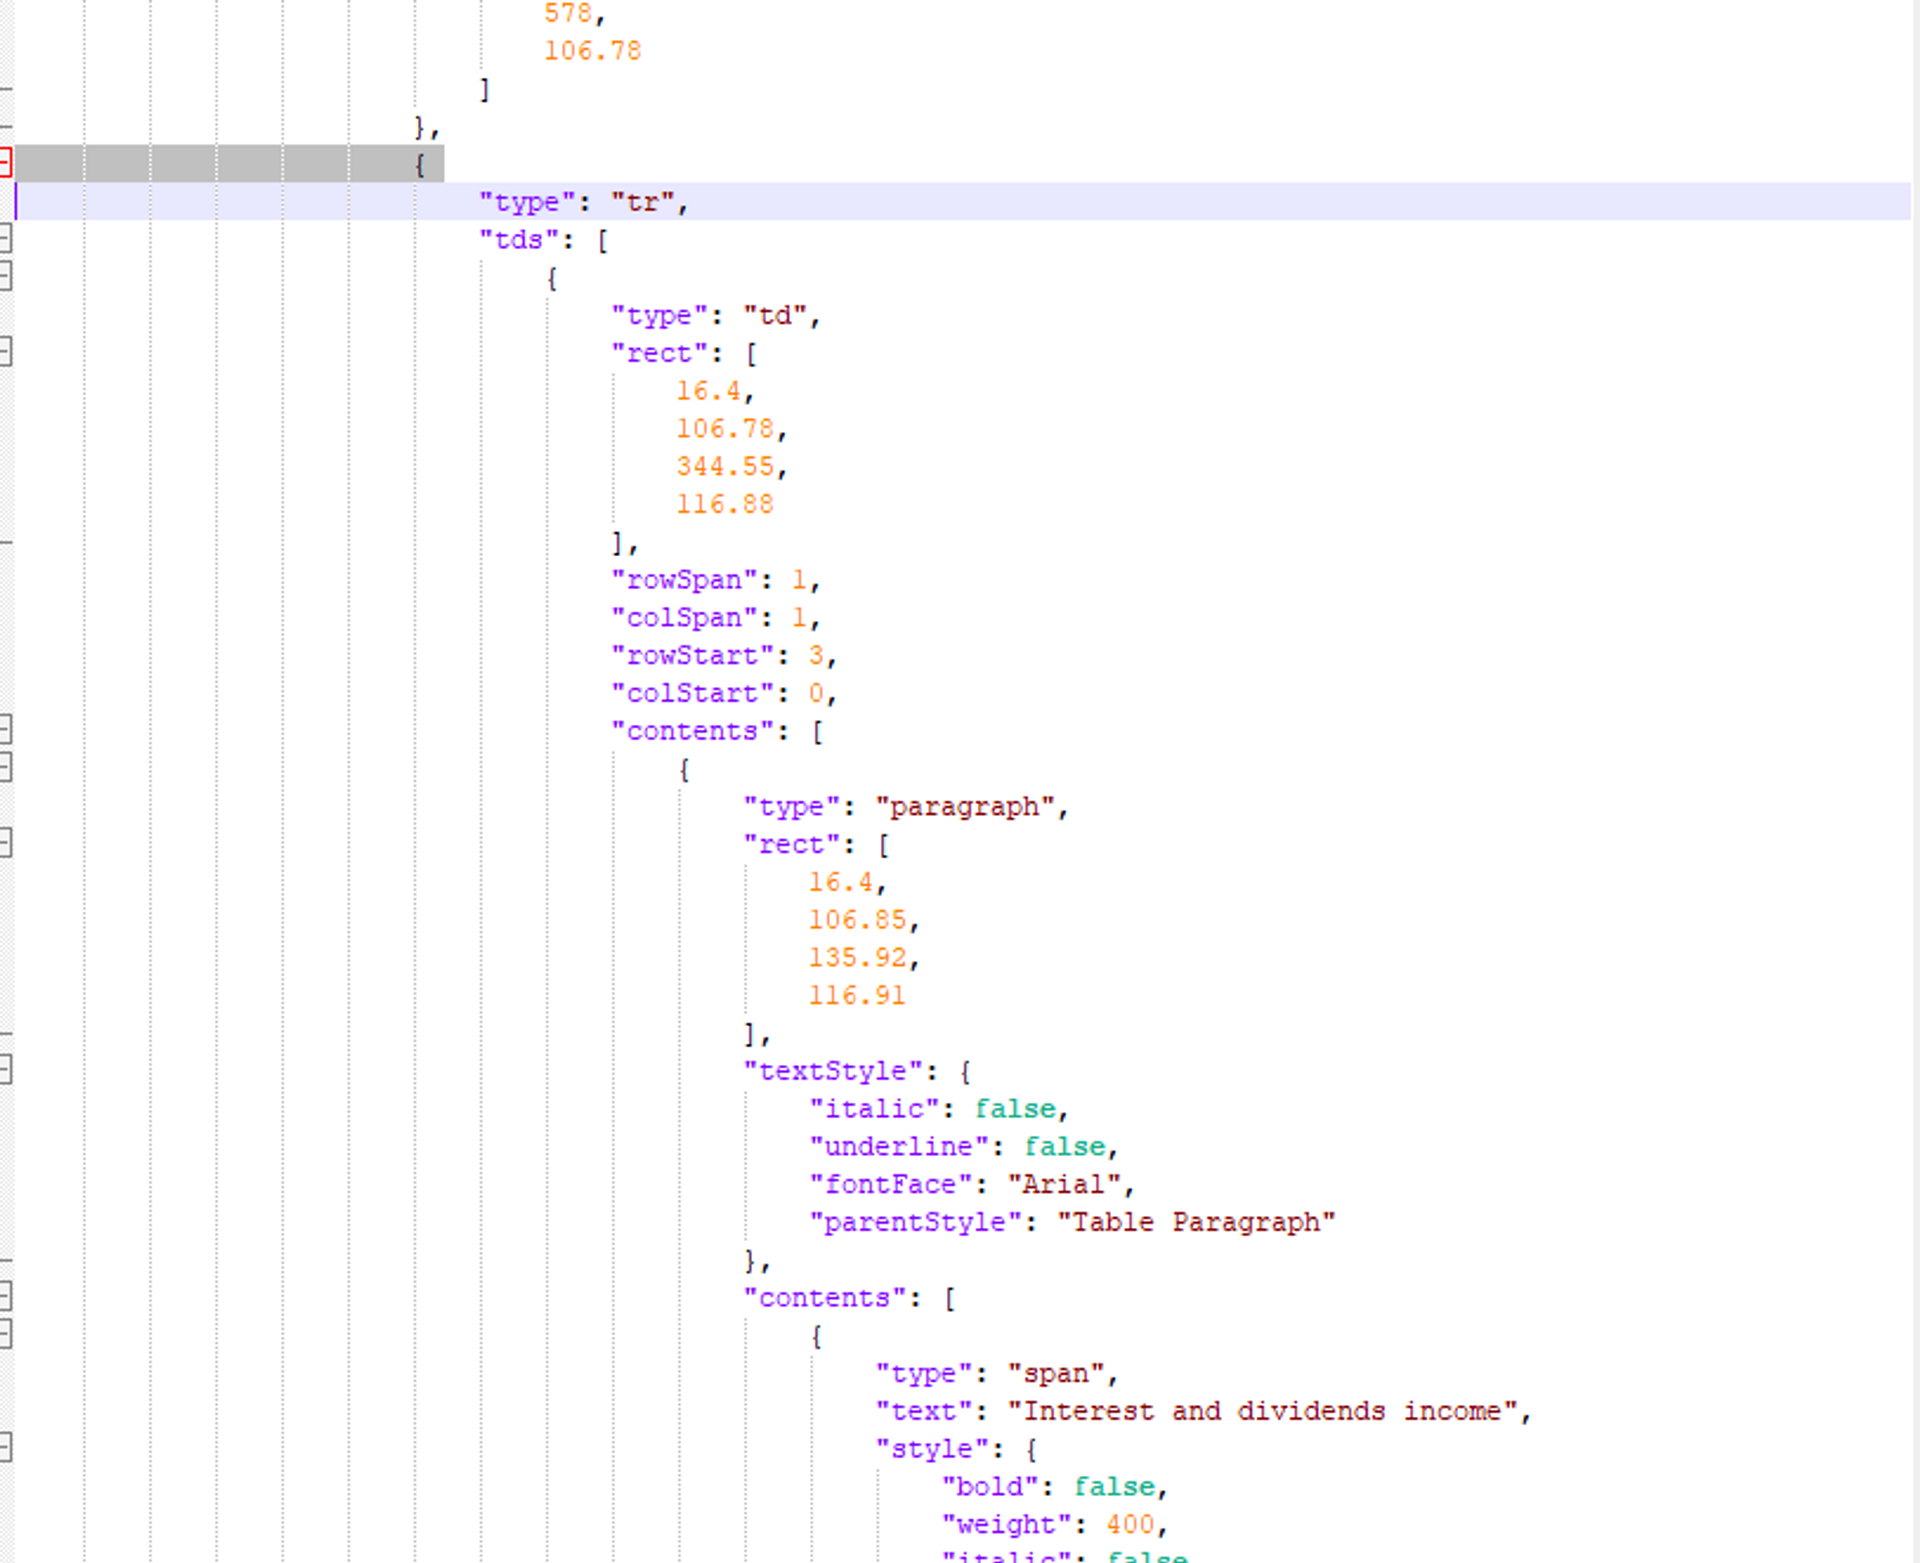 Image of the document structure in JSON